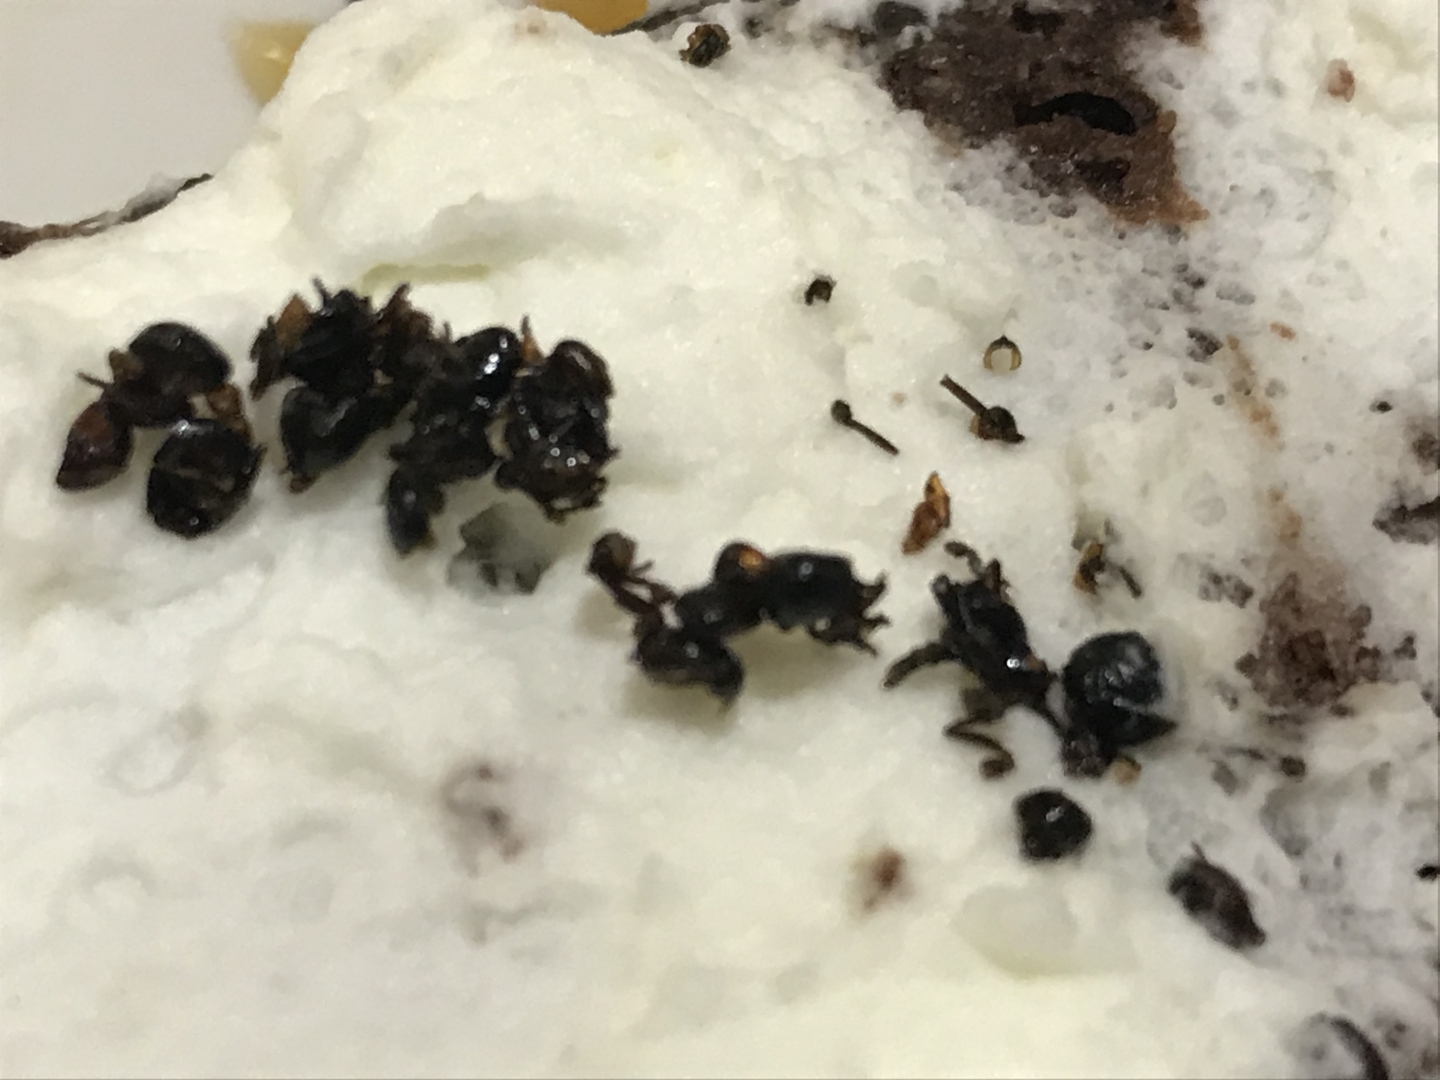 Black ants are set upon white vanilla frosting on a brownie.